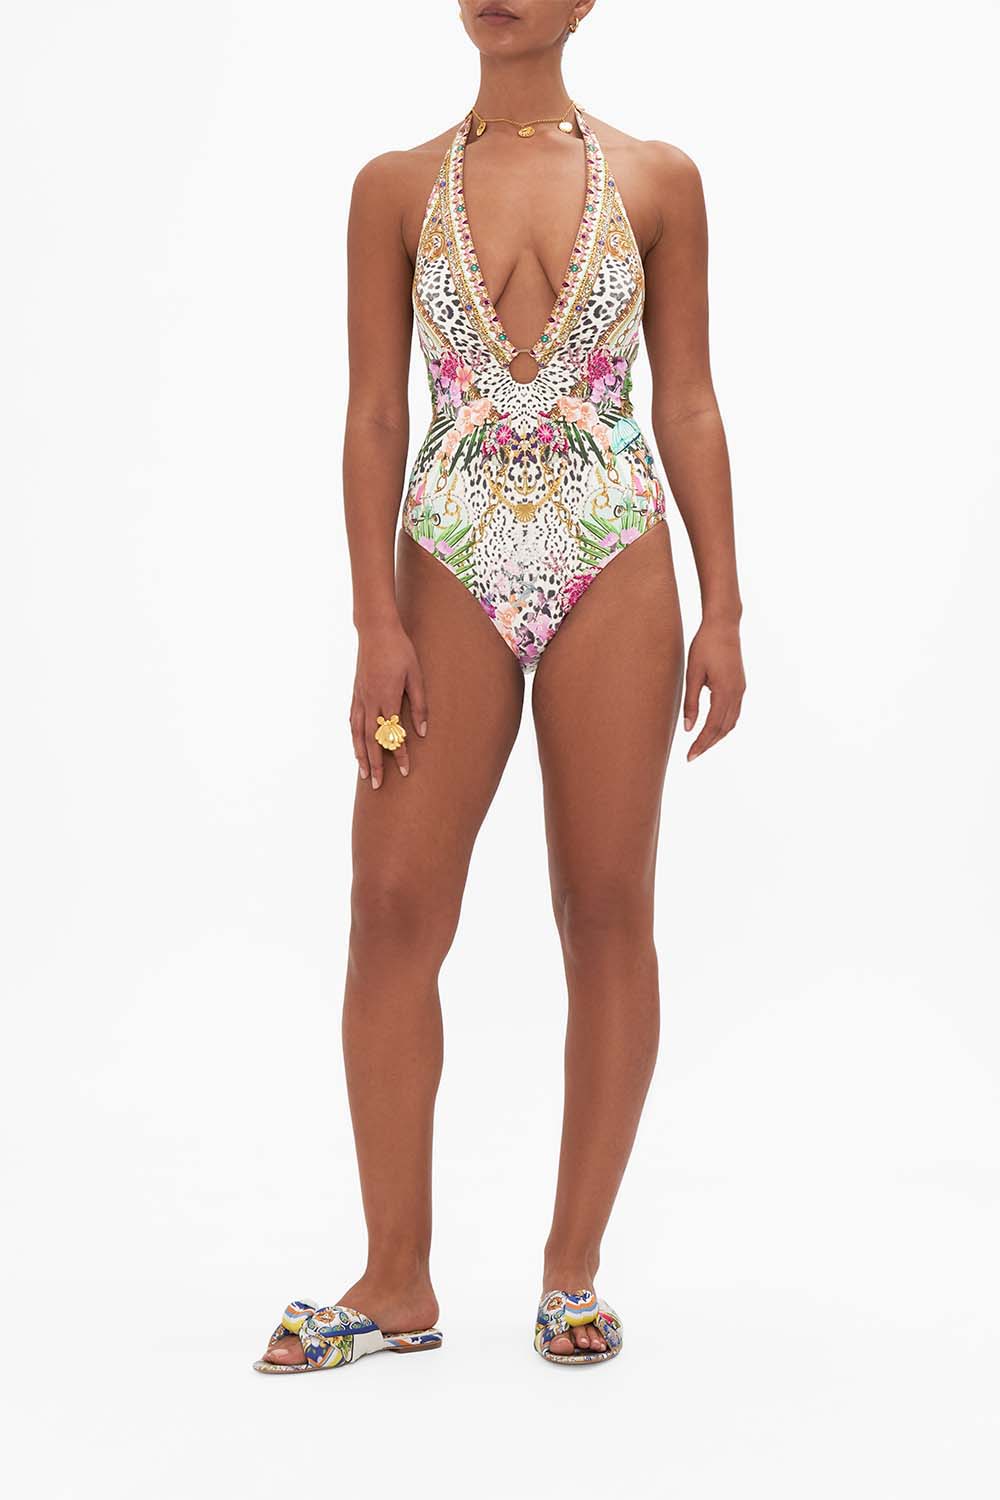 Front view of model wearing CAMILLA swimwear one piece swimsuit with ring detail in Dear Amore Mio print